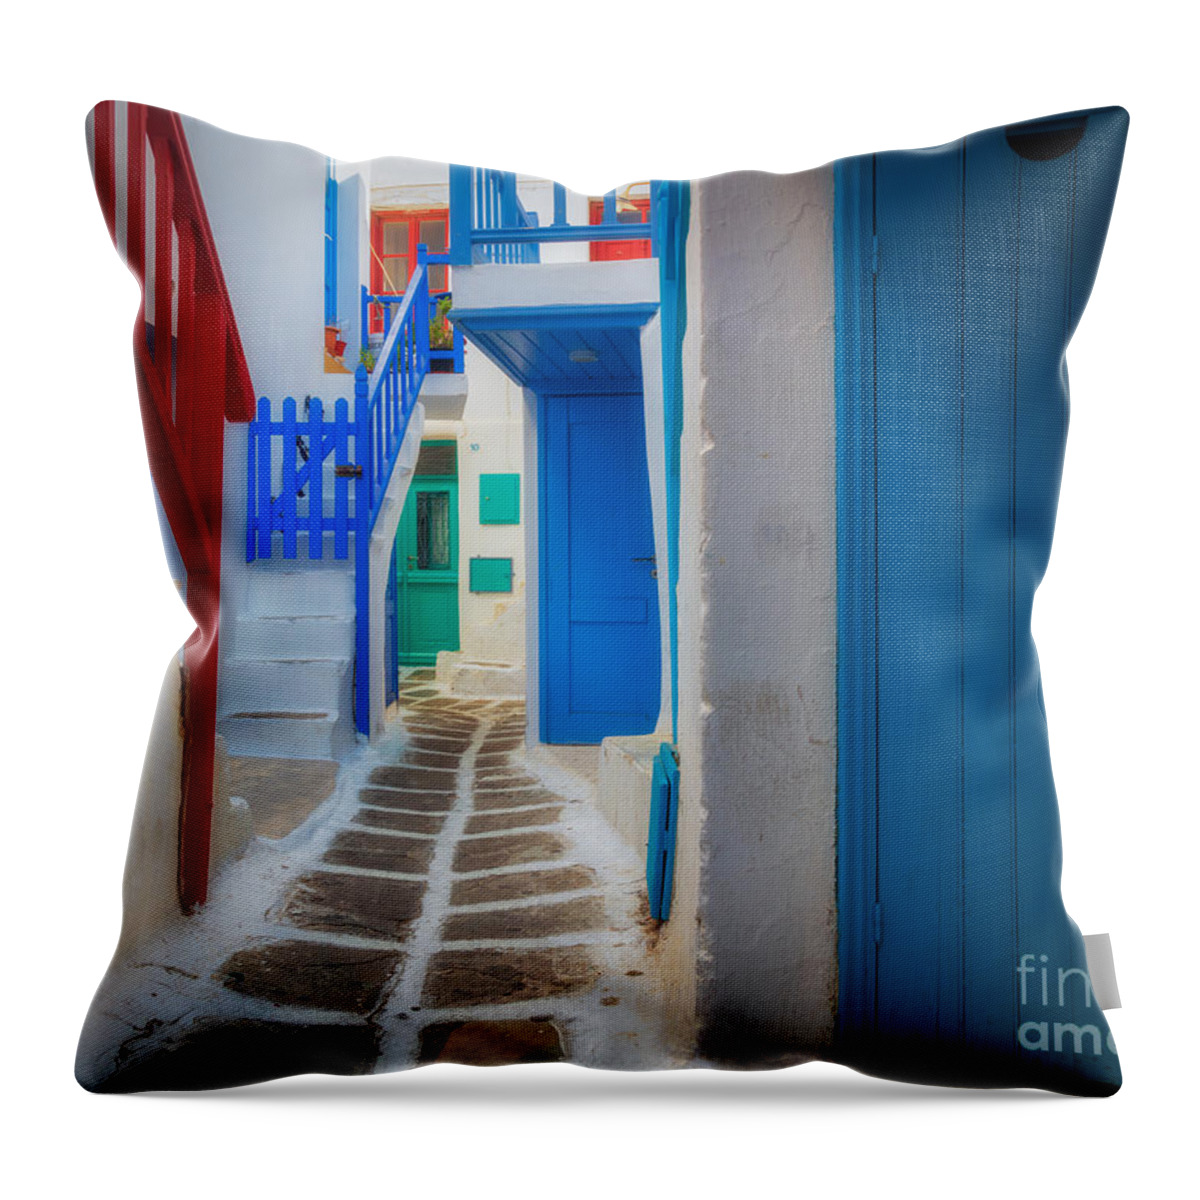 Aegean Sea Throw Pillow featuring the photograph Mykonos Alley by Inge Johnsson